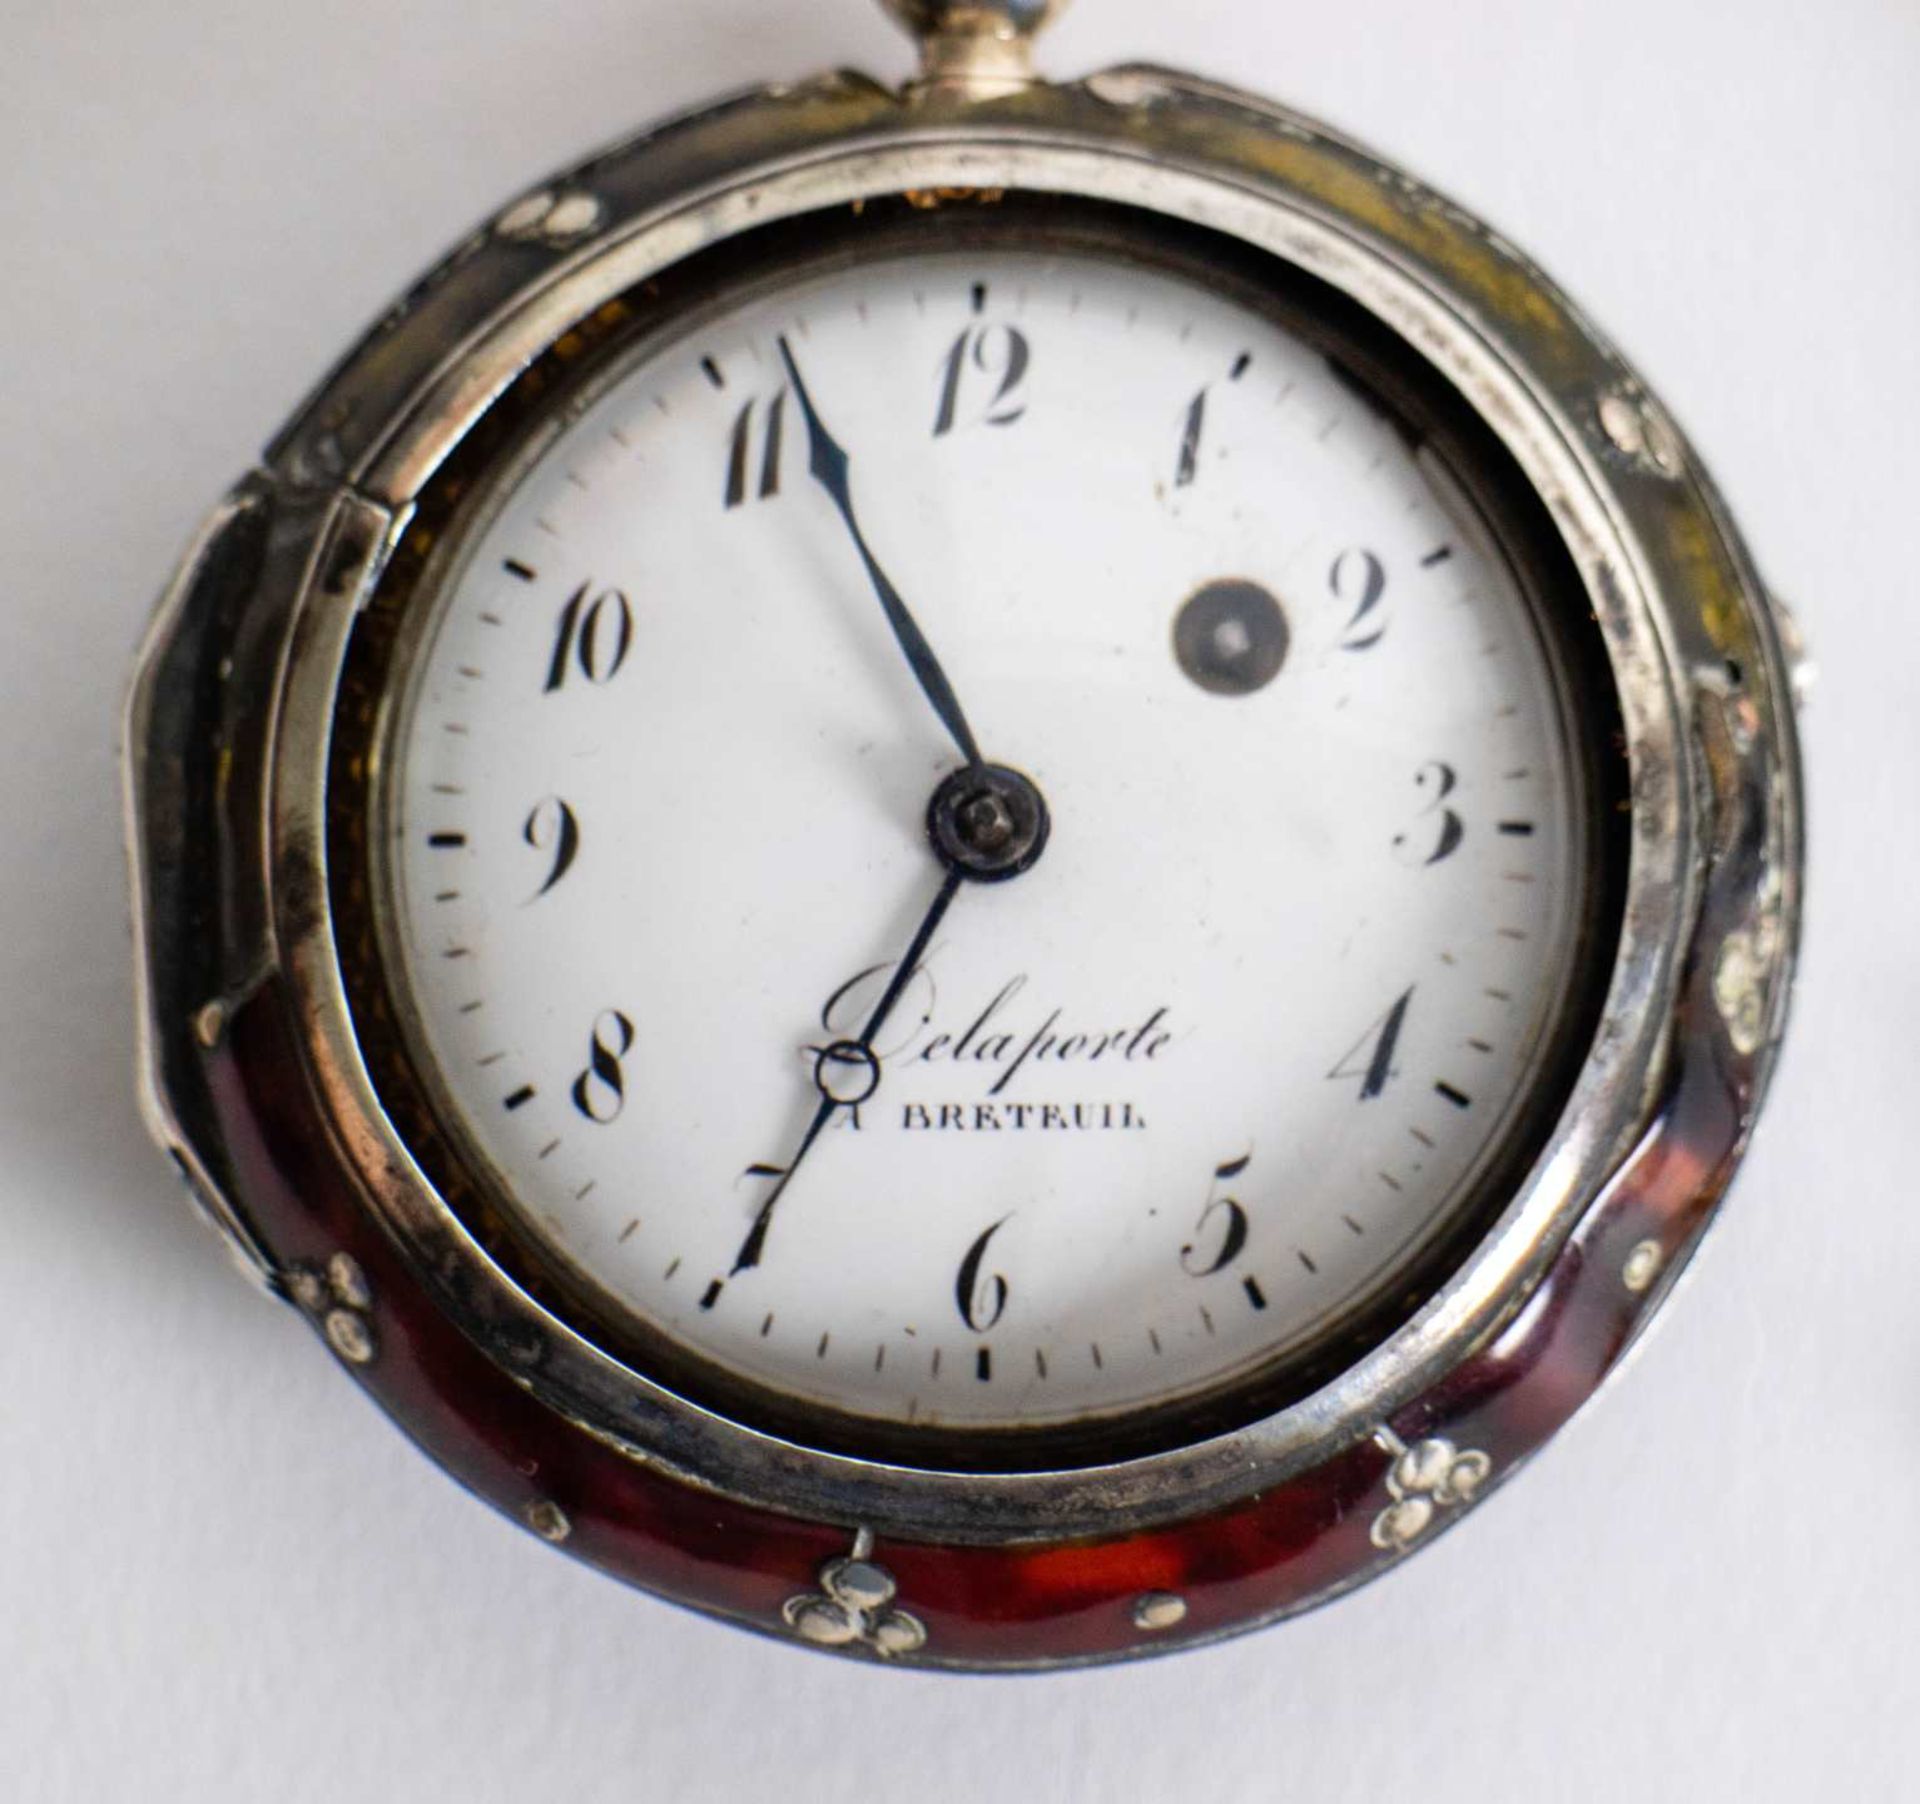 Pocket watch Delaporte A Breteuil - Image 2 of 3